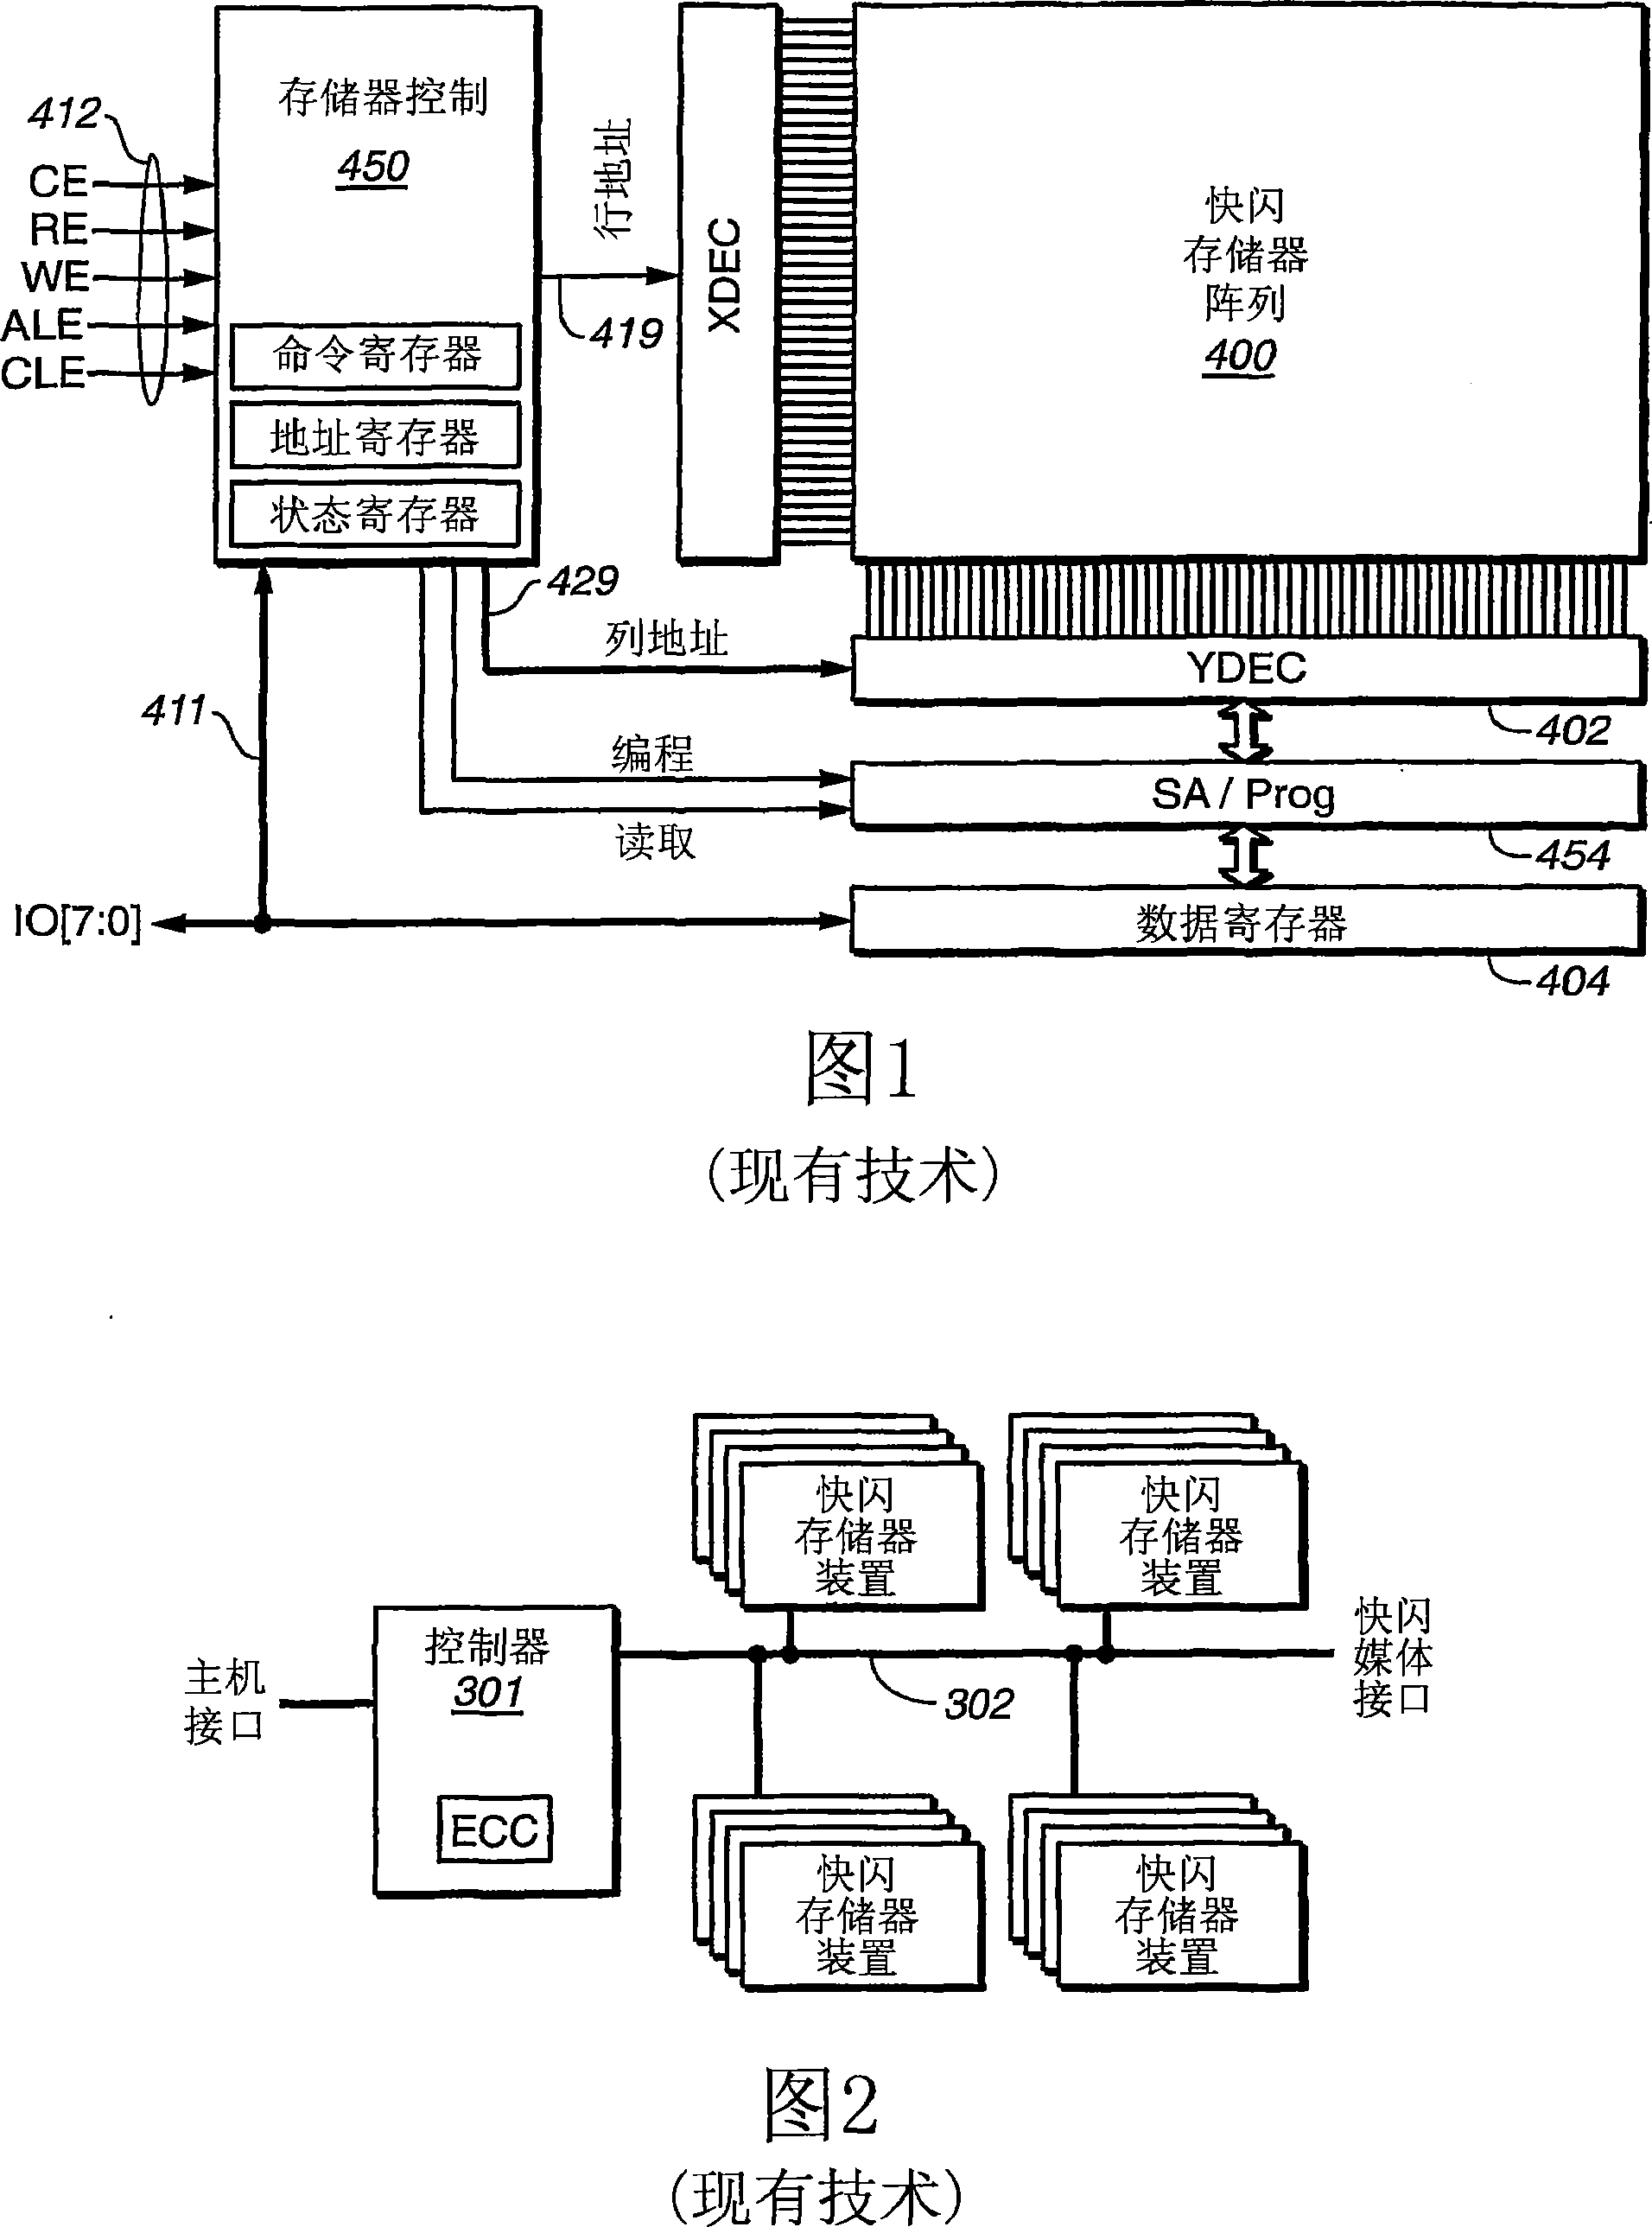 Data relocation in a memory system